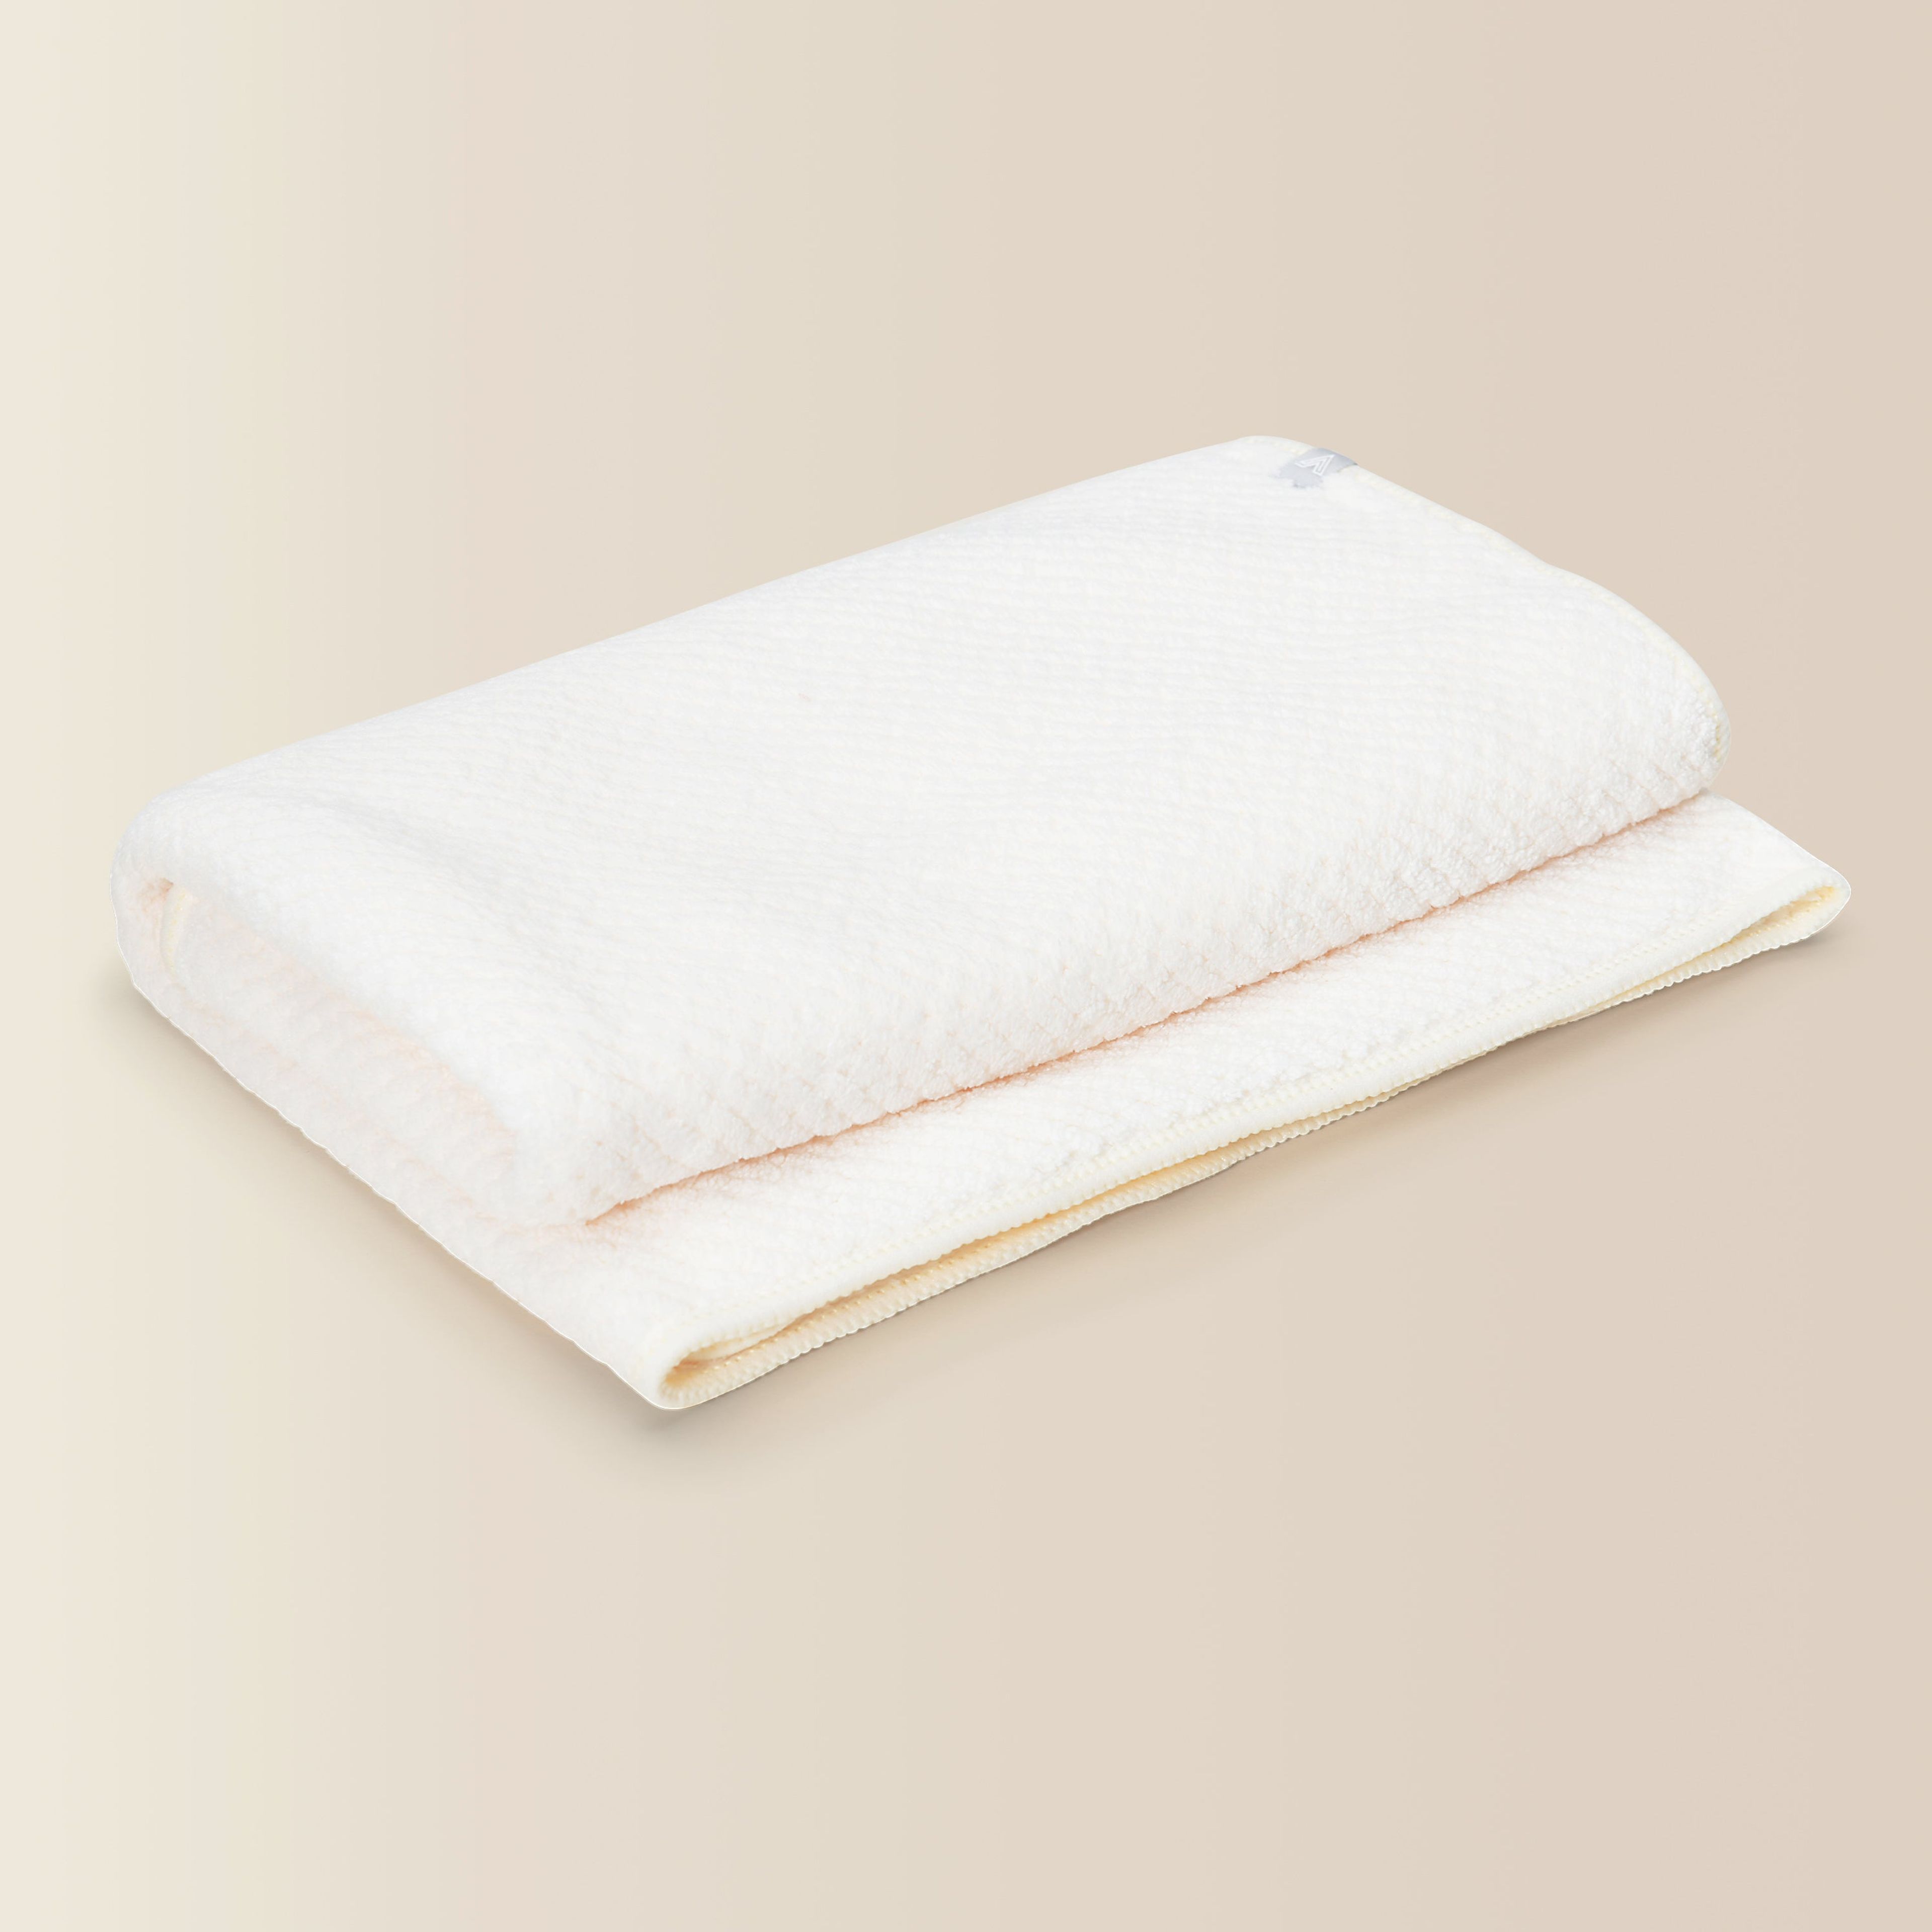 The VOLO Essential Towel